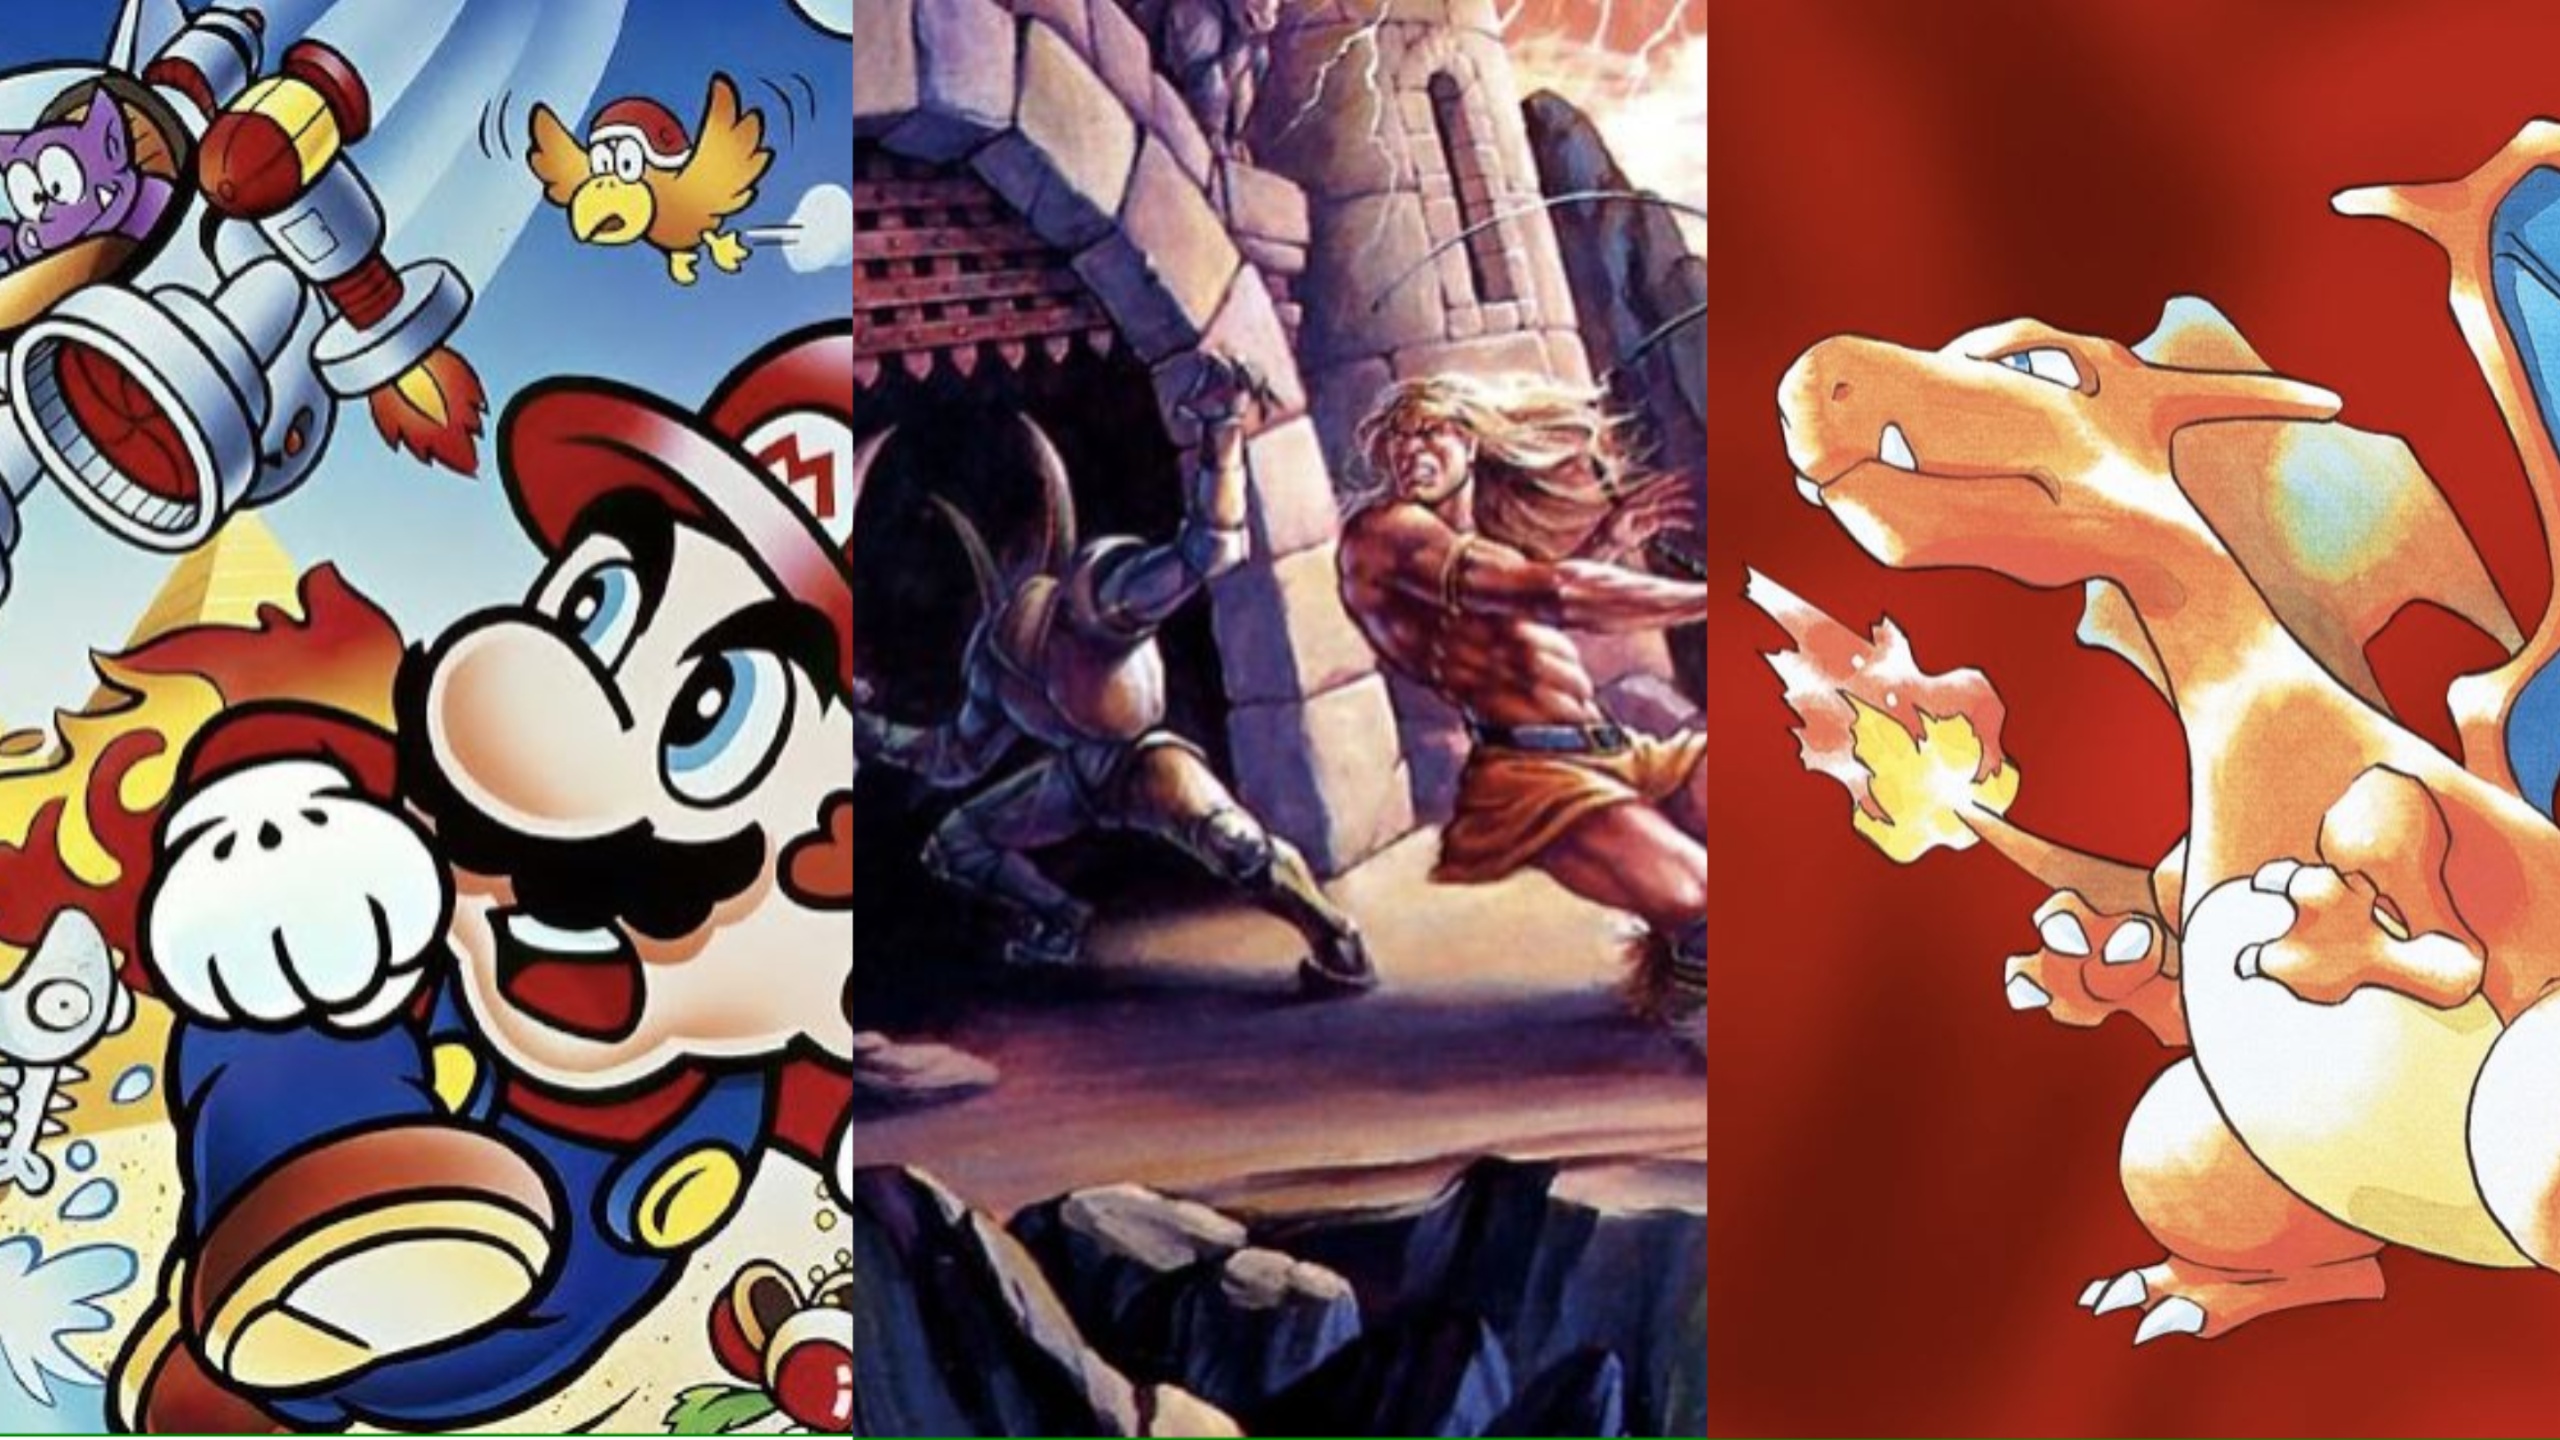 The Games That Defined the Nintendo Game Boy